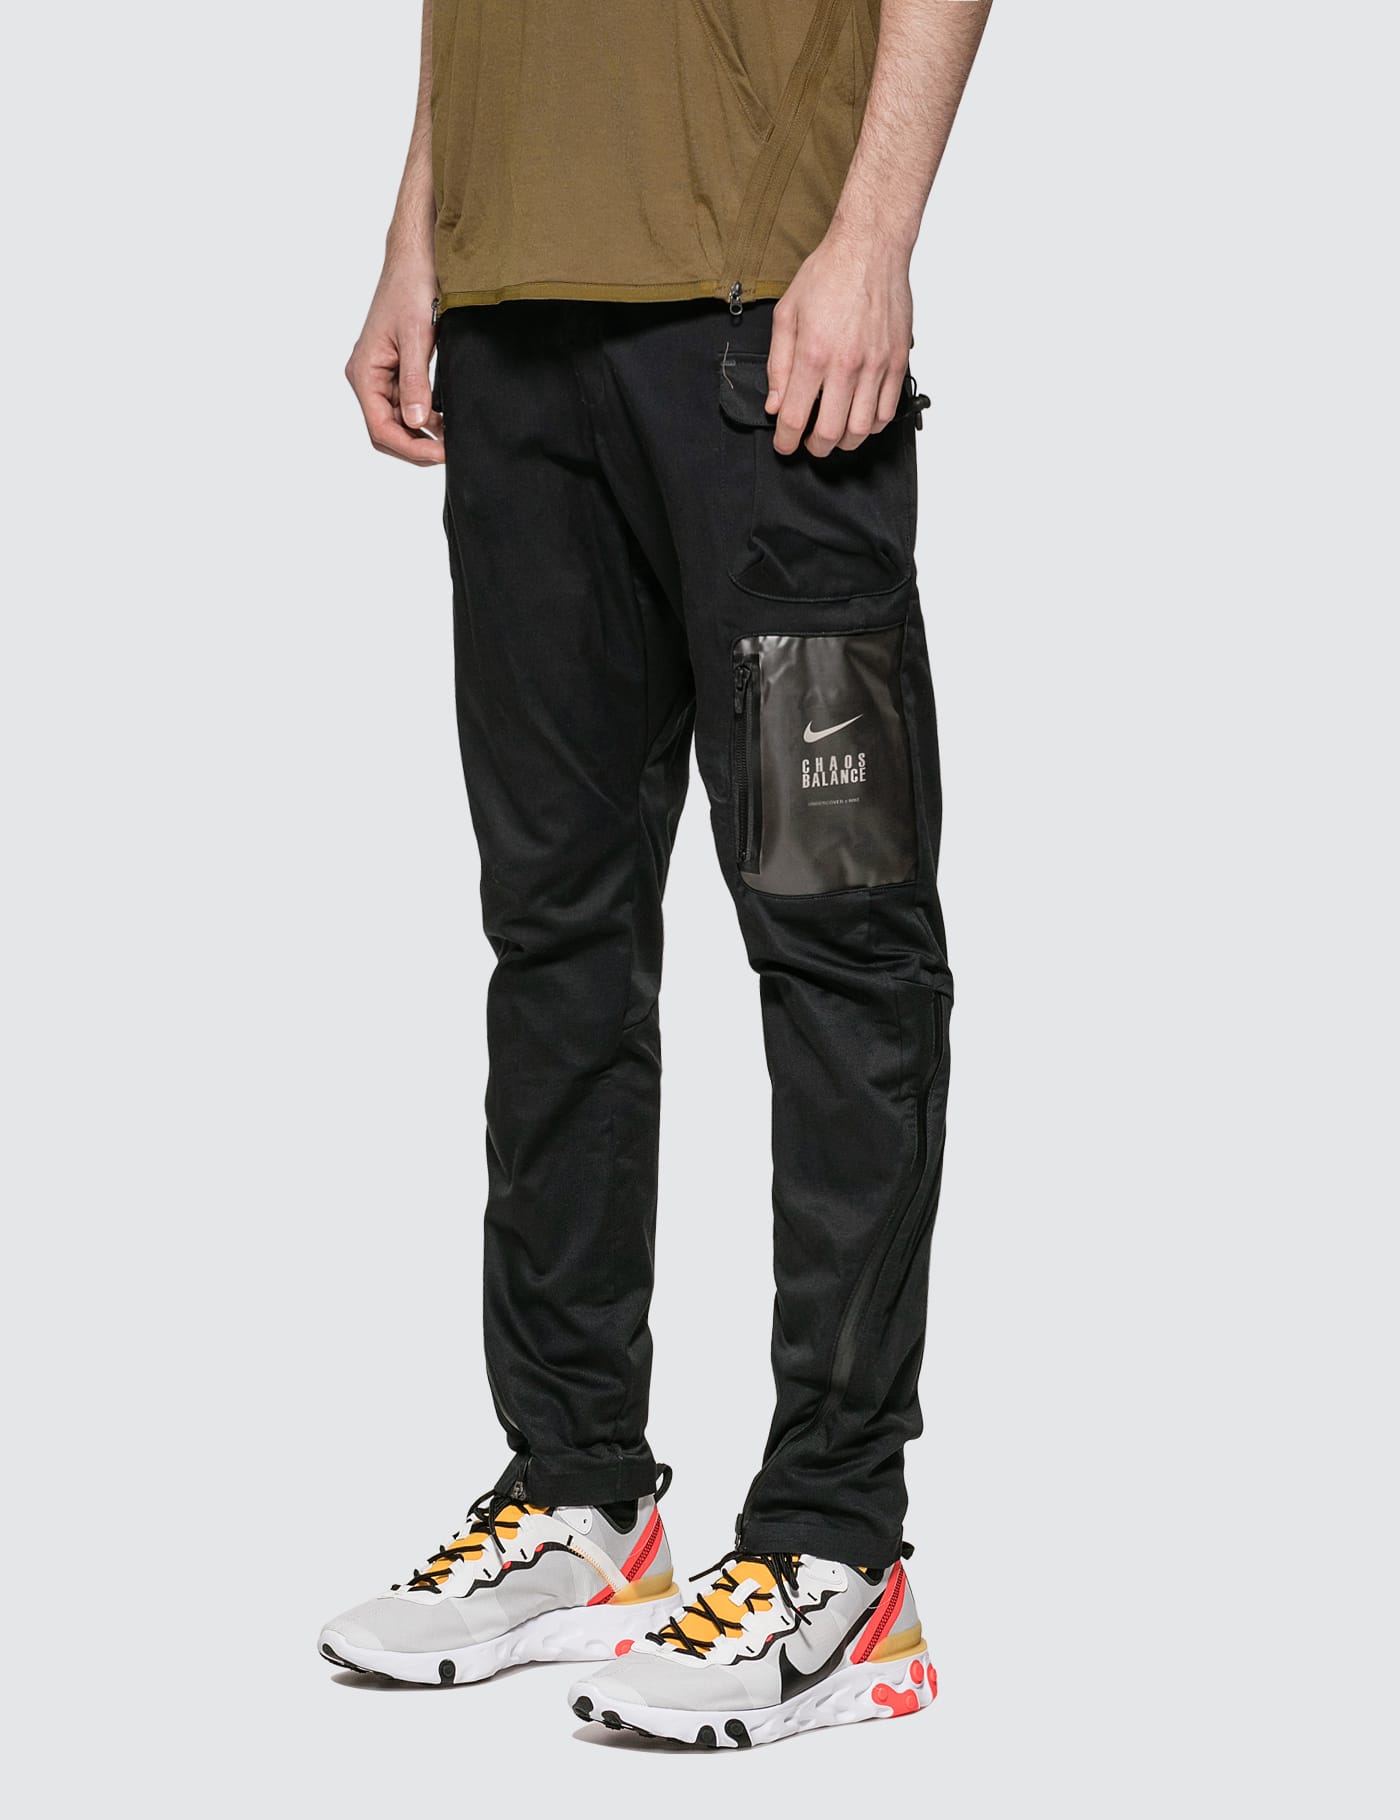 undercover x nike pants